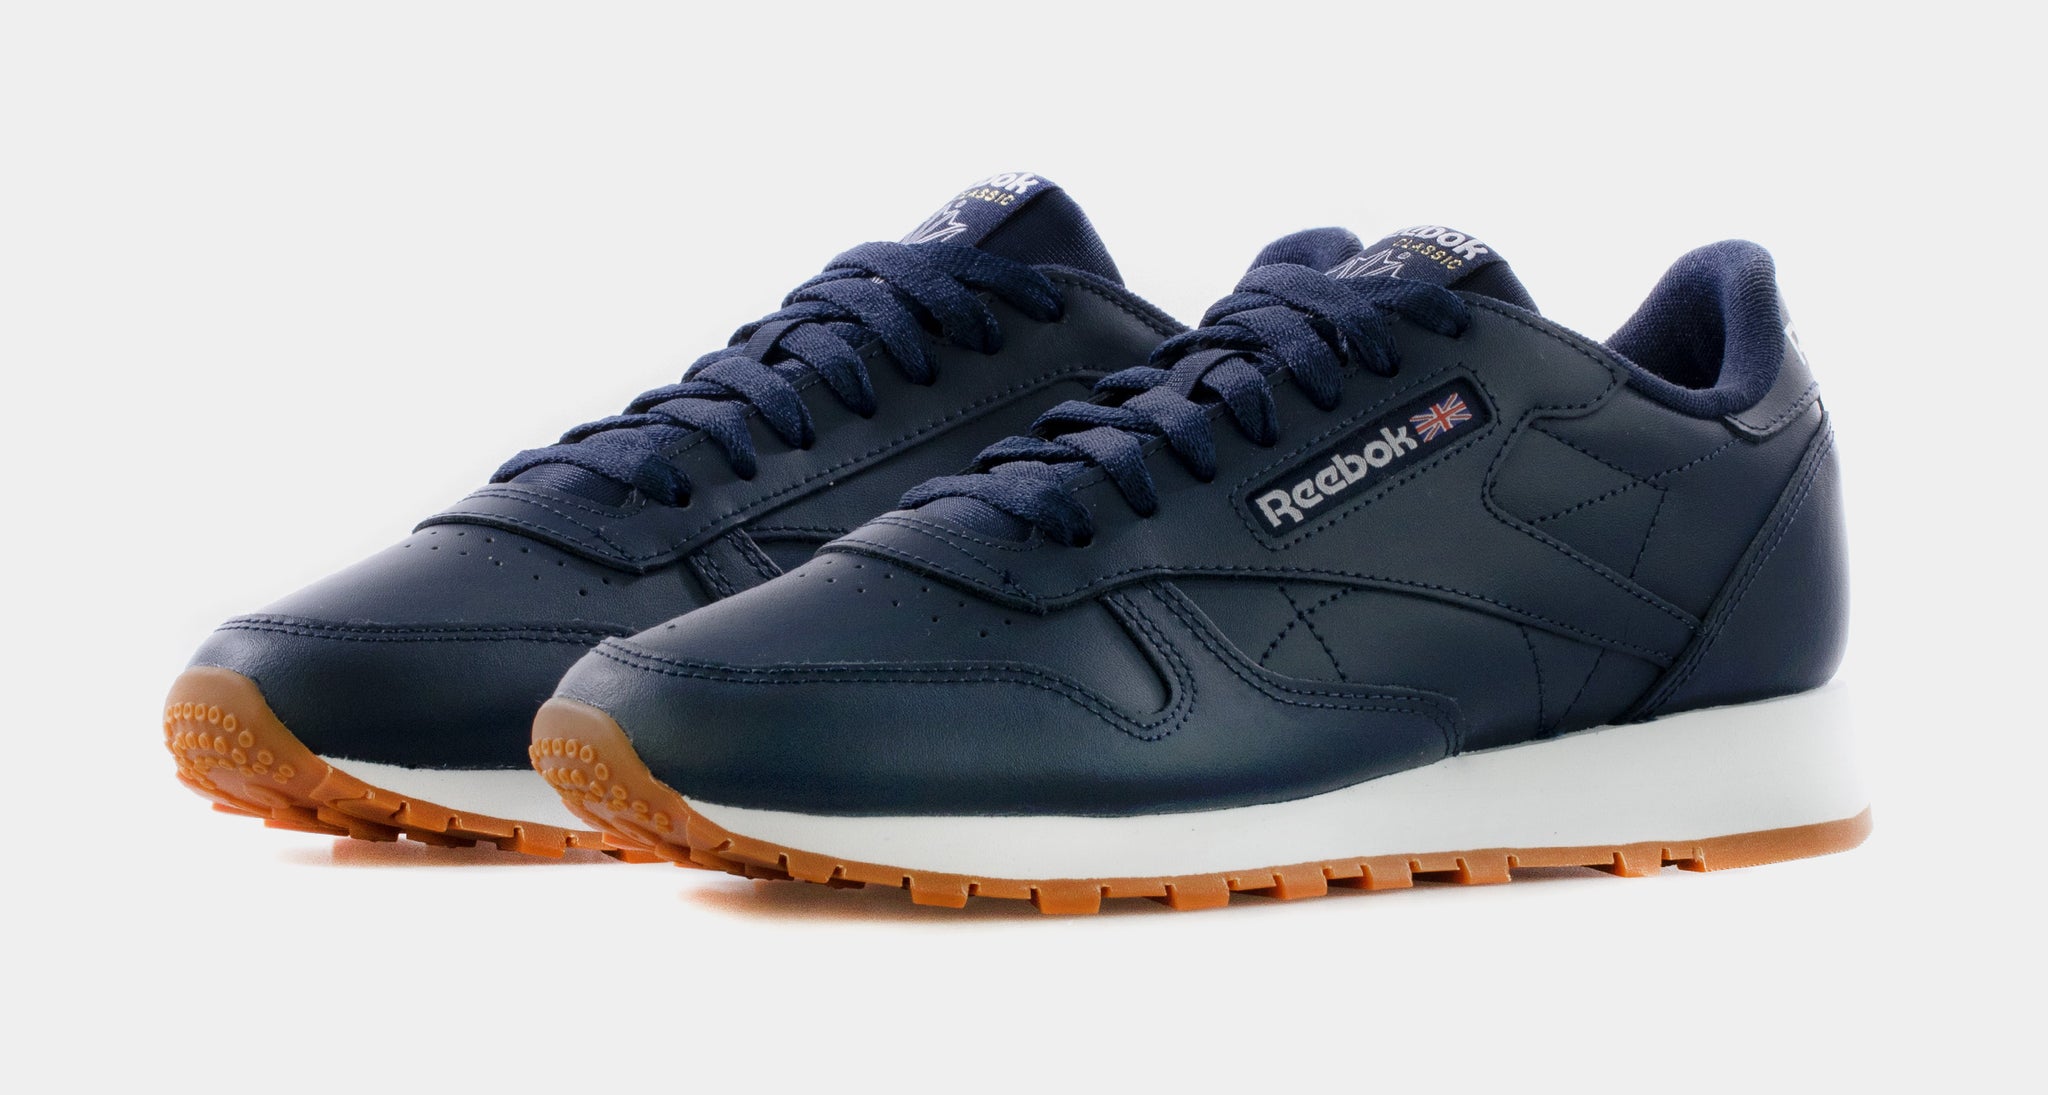 Reebok Classic Leather Mens Lifestyle Shoes Navy Blue GY3600 – Shoe Palace | Sneaker low